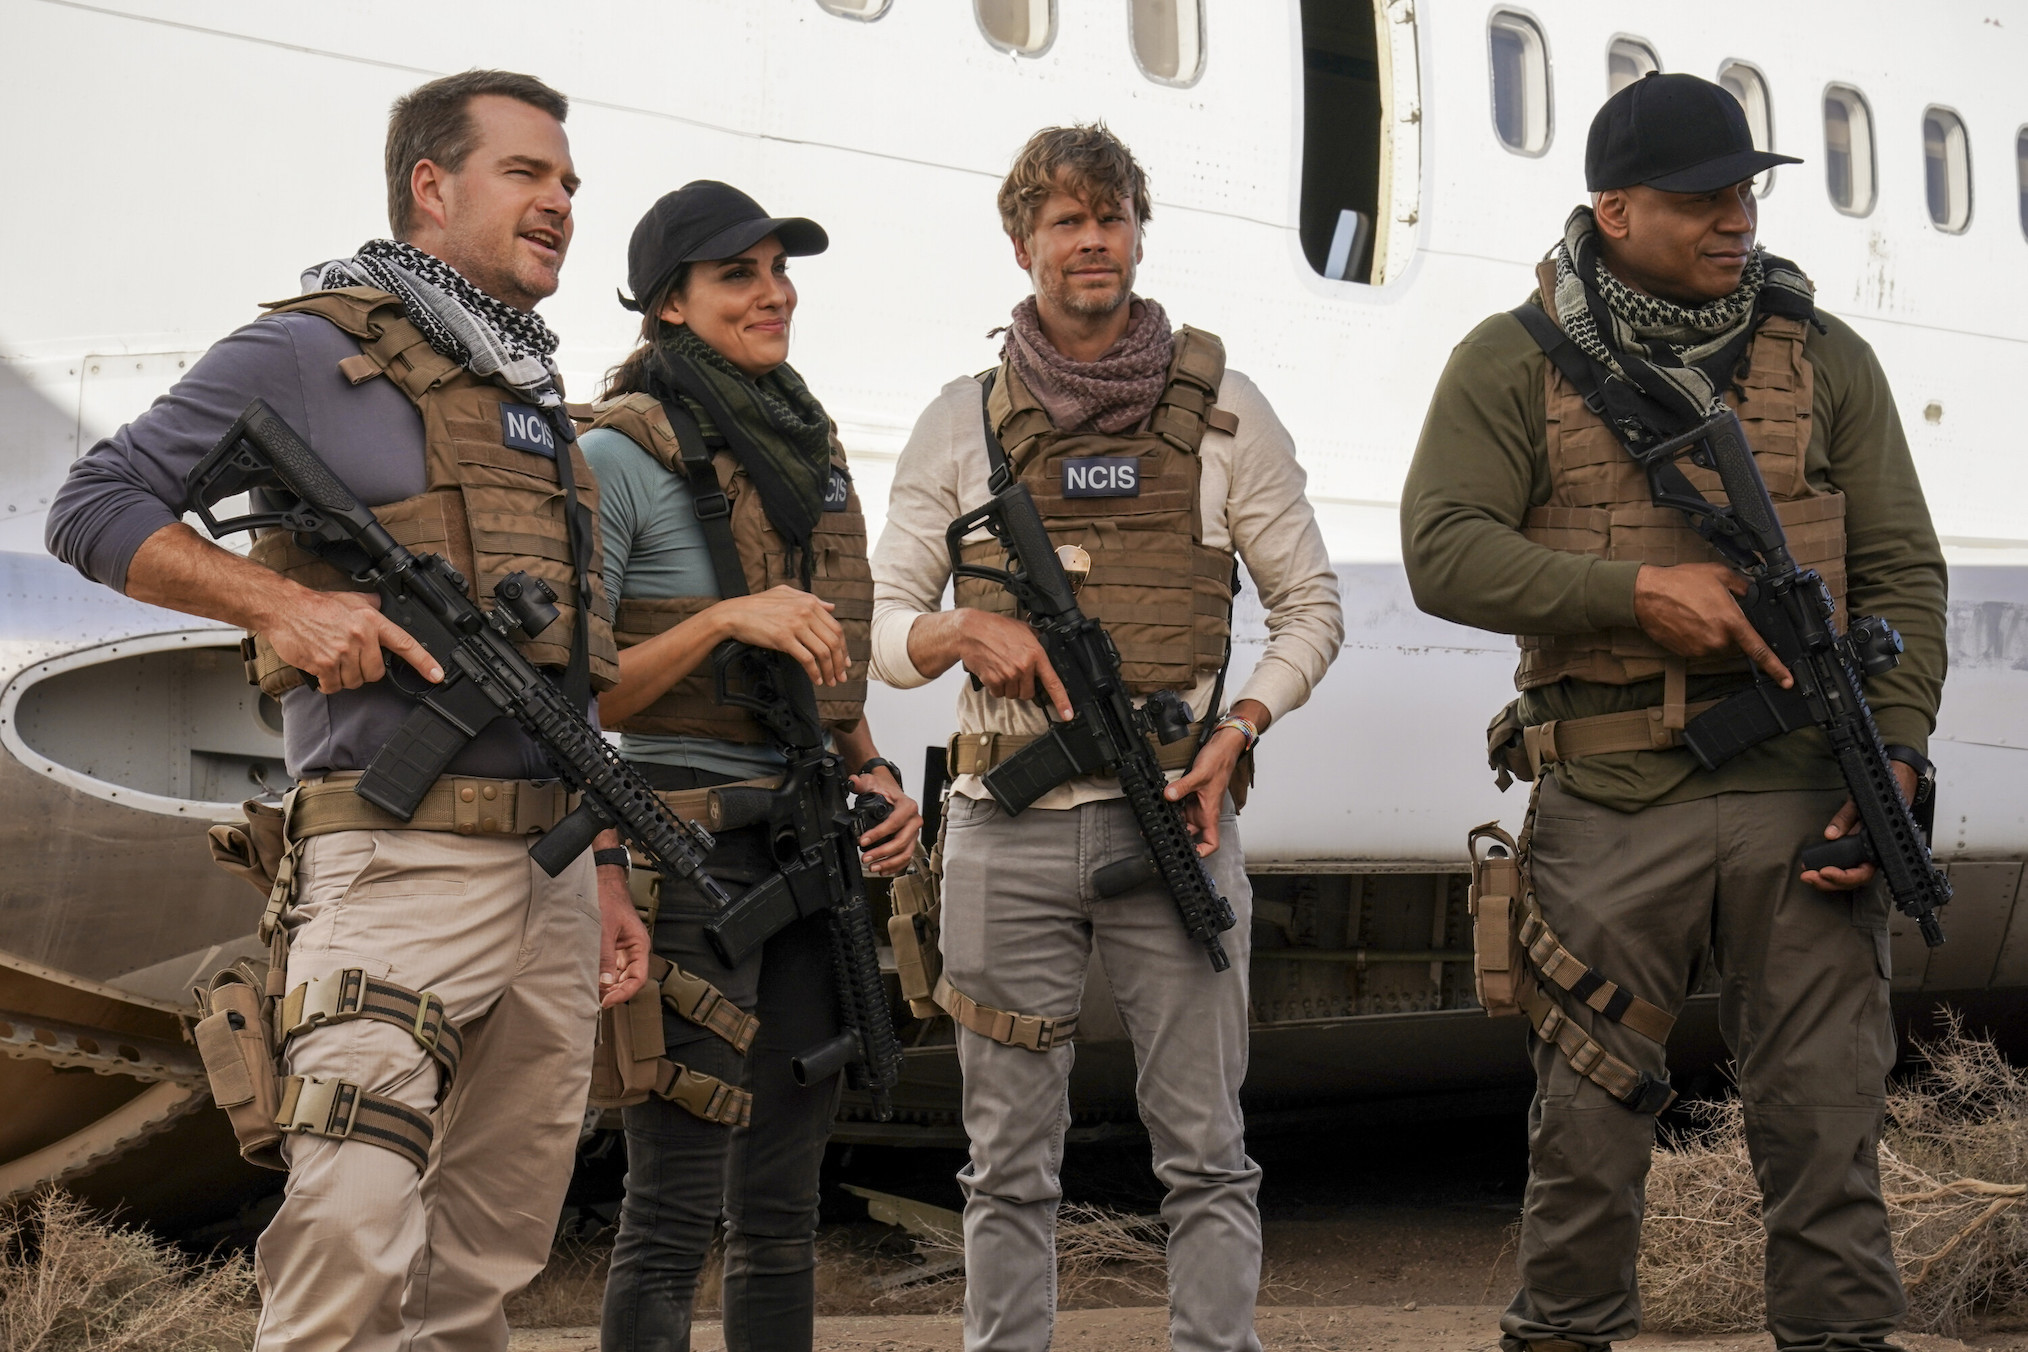 Chris O'Donnell, Daniela Ruah, Eric Christian Olsen, and LL Cool J in 'NCIS: Los Angeles'